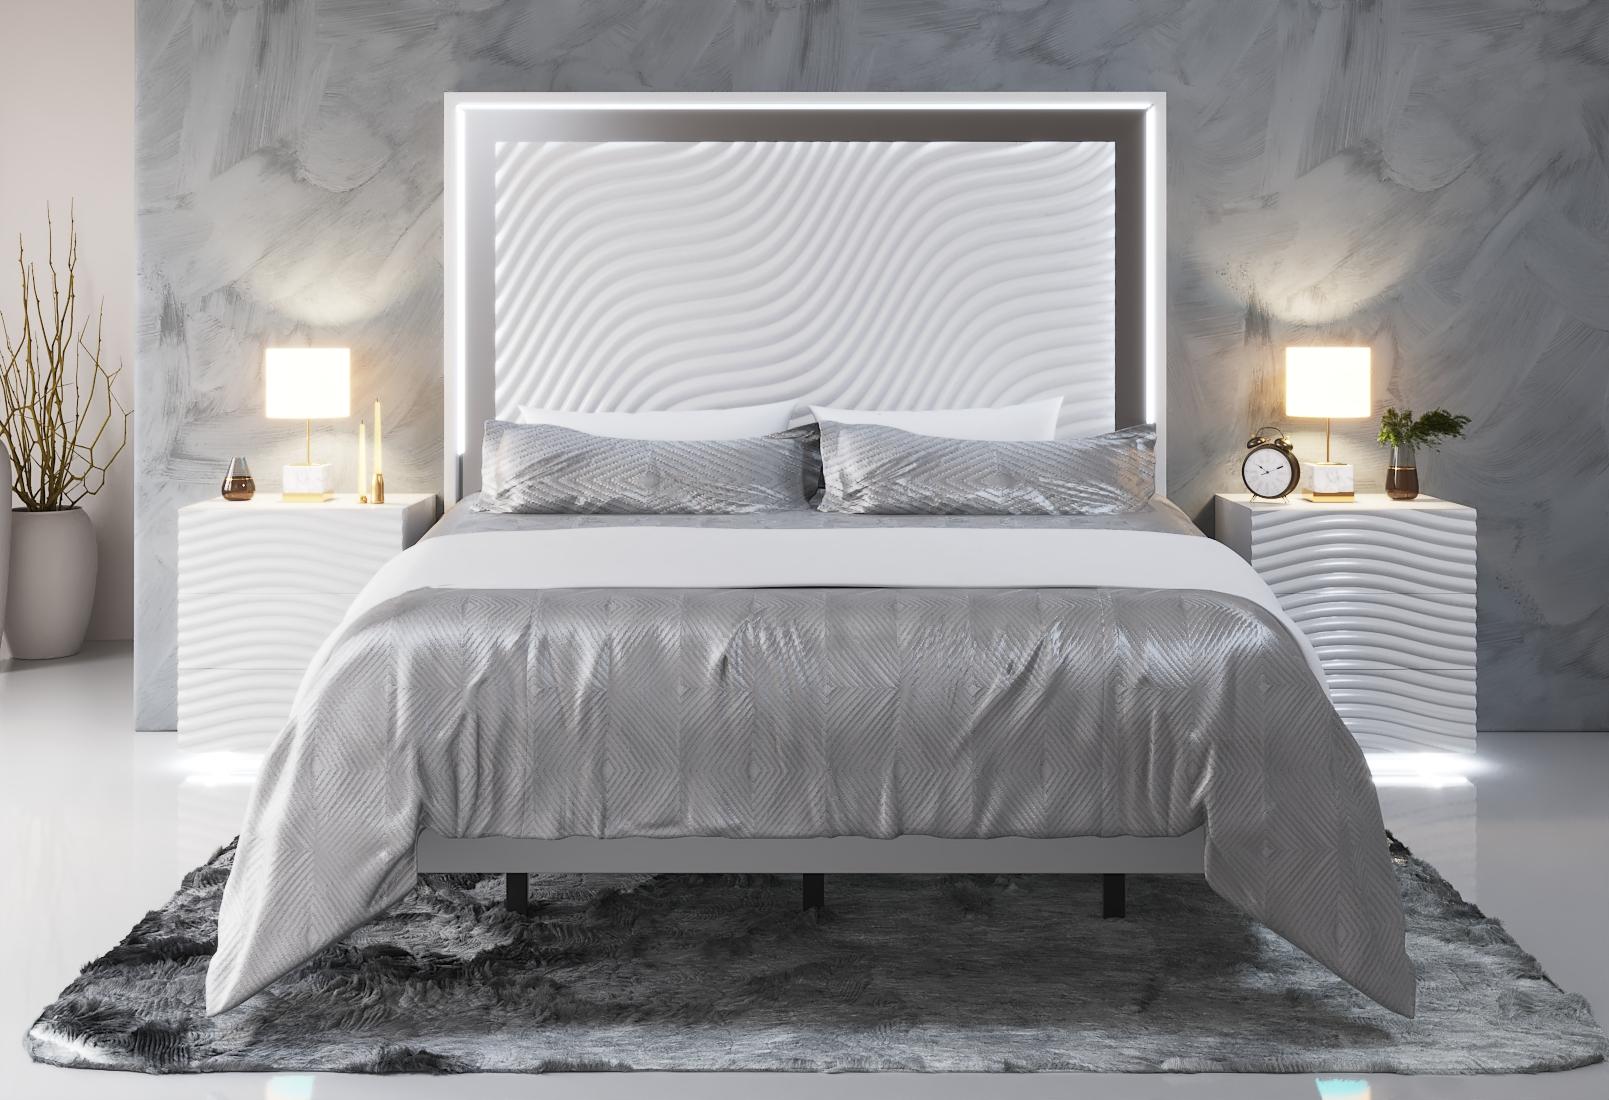 

    
Glam Shiny White Queen Bedroom Set 6 WAVE ESF Contemporary Modern MADE IN SPAIN
